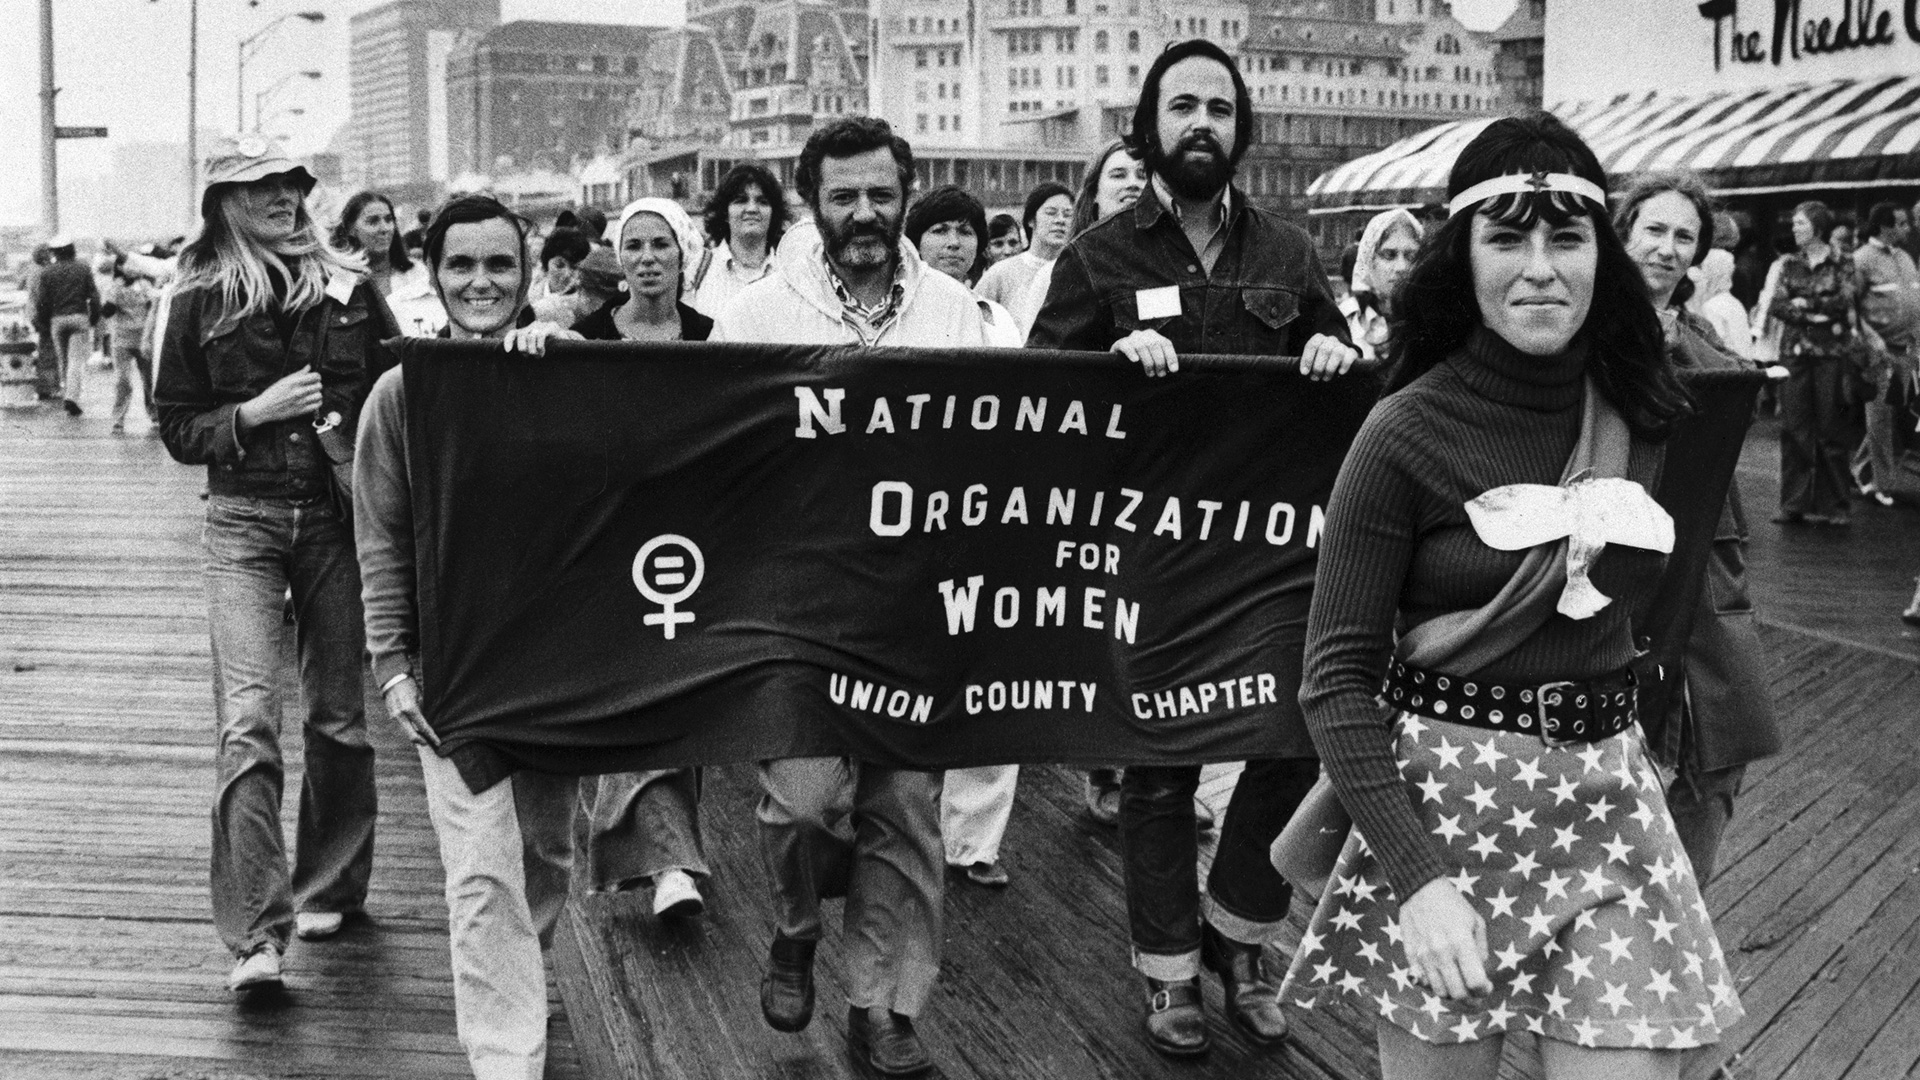 October 29, 1966: The National Organization for Women’s Statement of Purpose Was Adopted